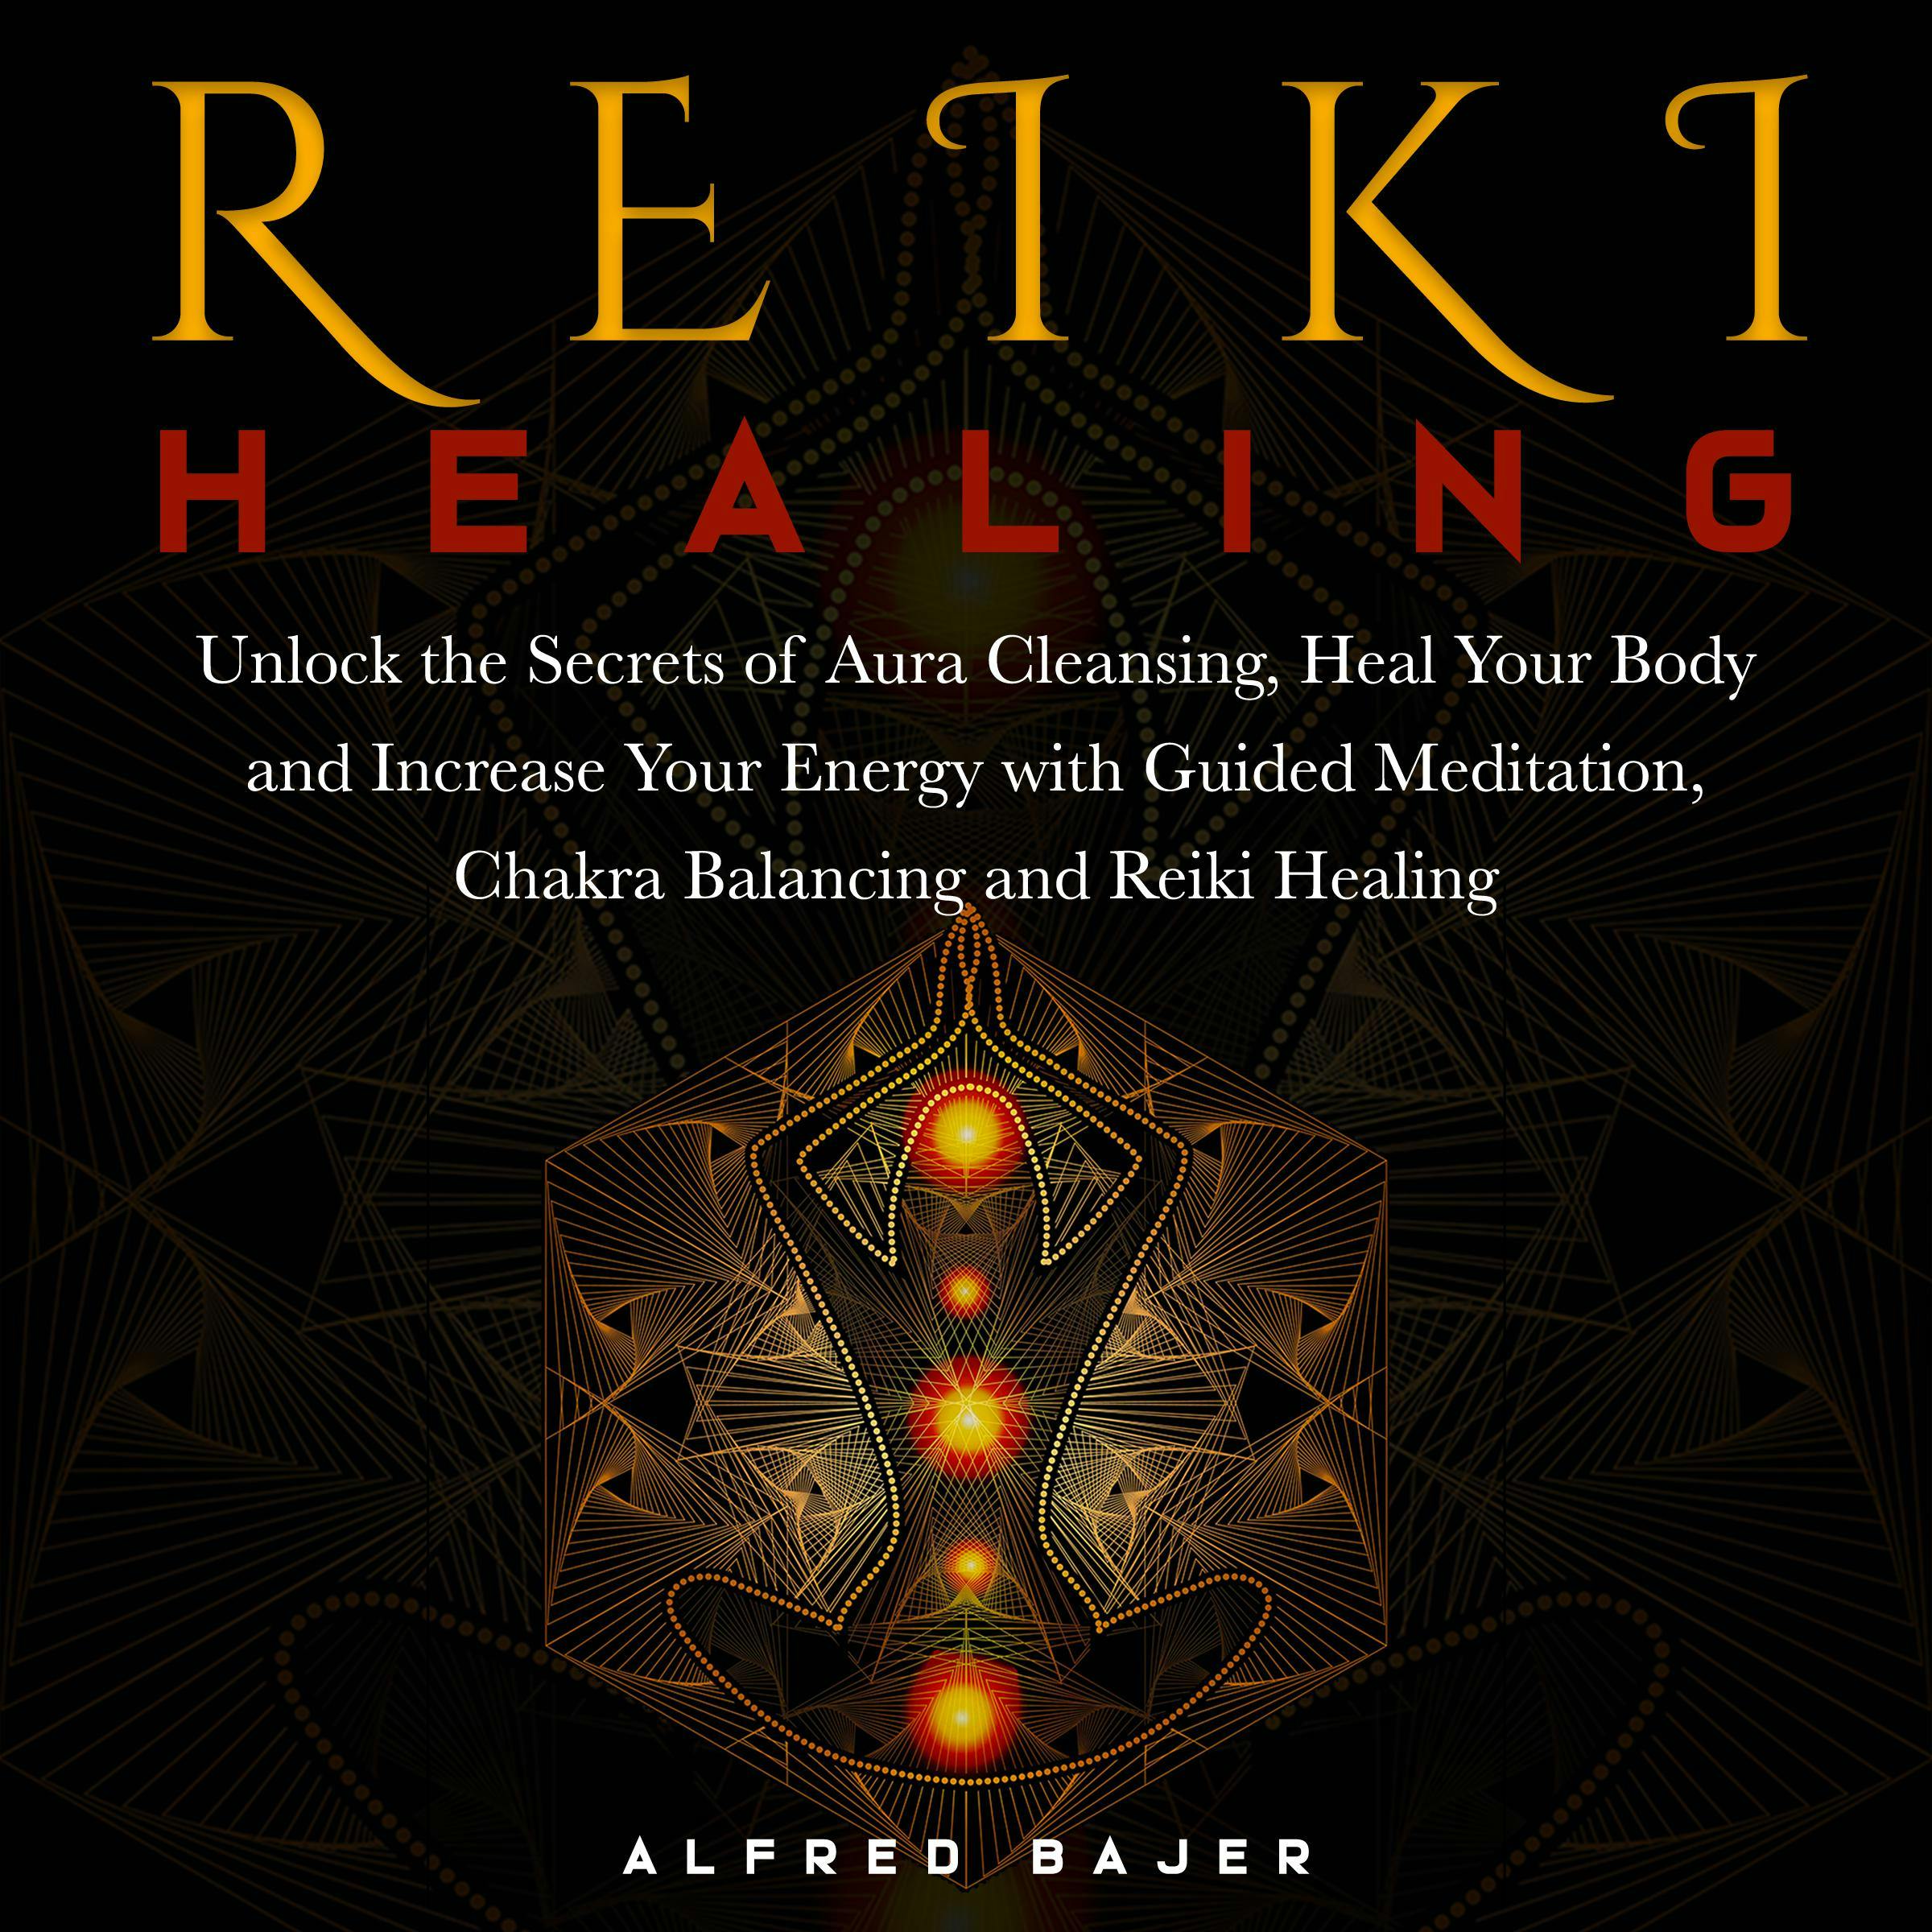 Reiki Healing: Unlock the Secrets of Aura Cleansing, Heal Your Body and Increase Your Energy with Guided Meditation, Chakra Balancing and Reiki Healing - Alfred Bajer